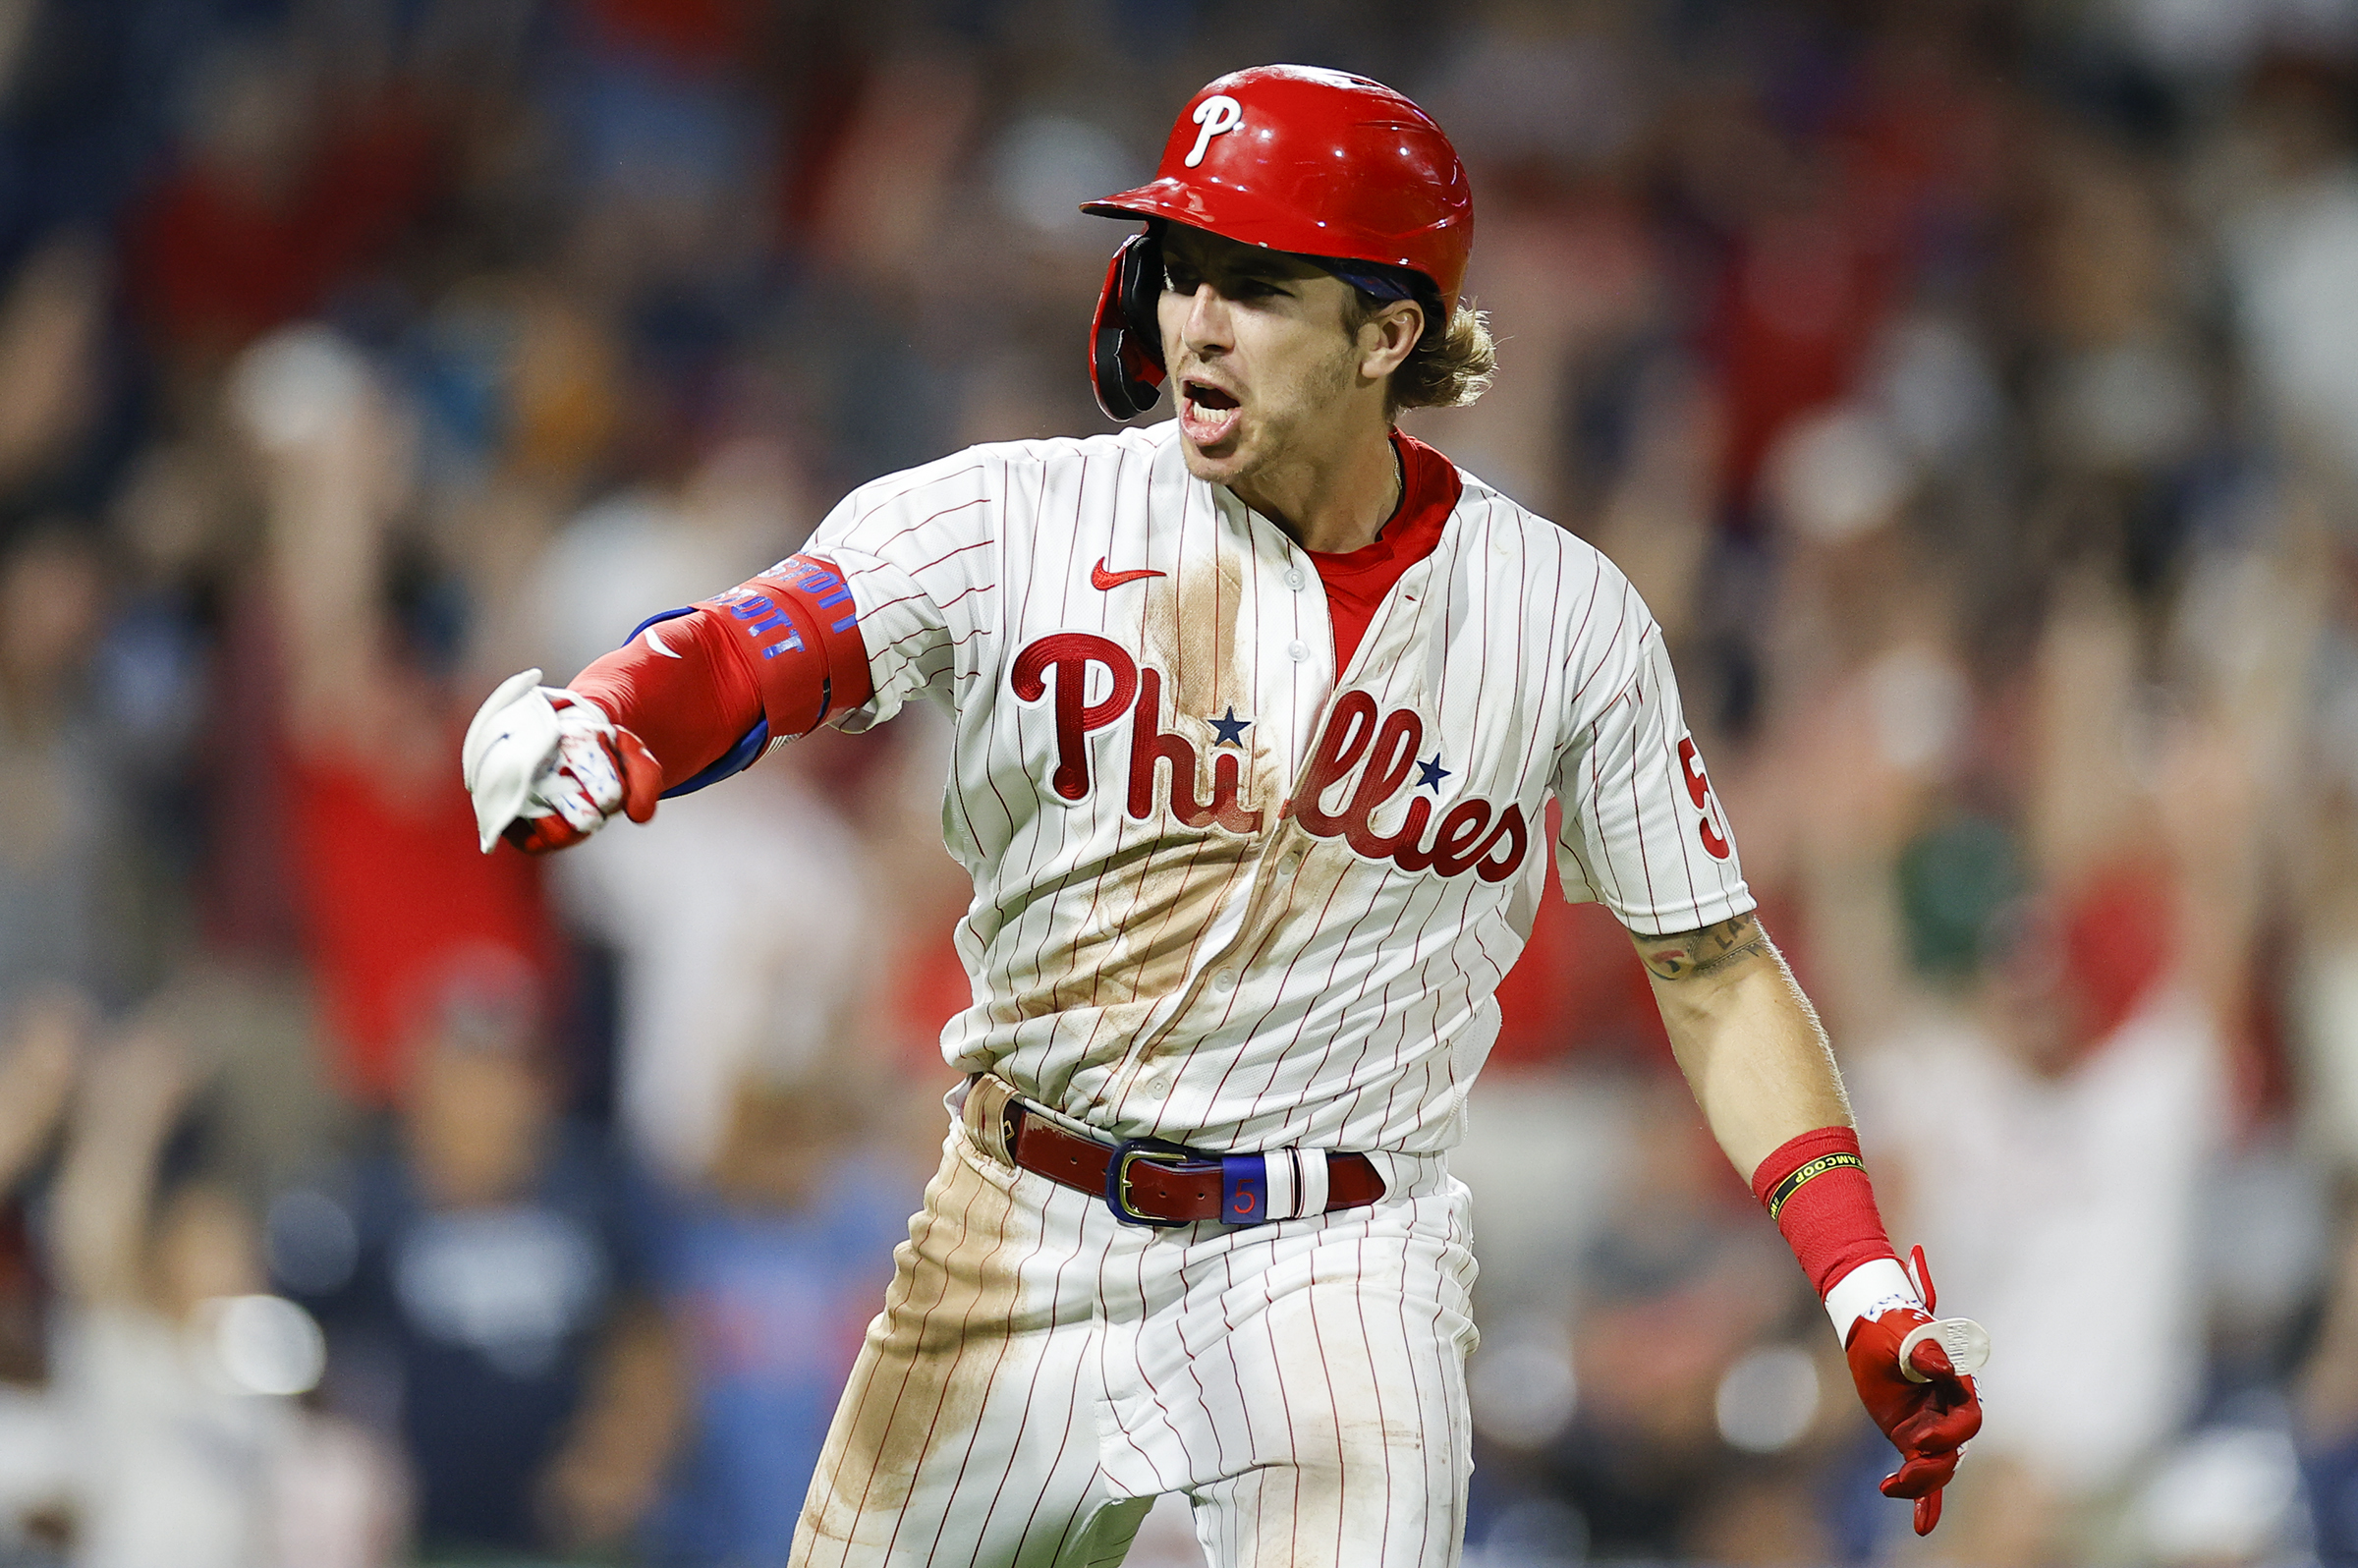 Phillies win against the Braves thanks to Bryson Stott's late home run